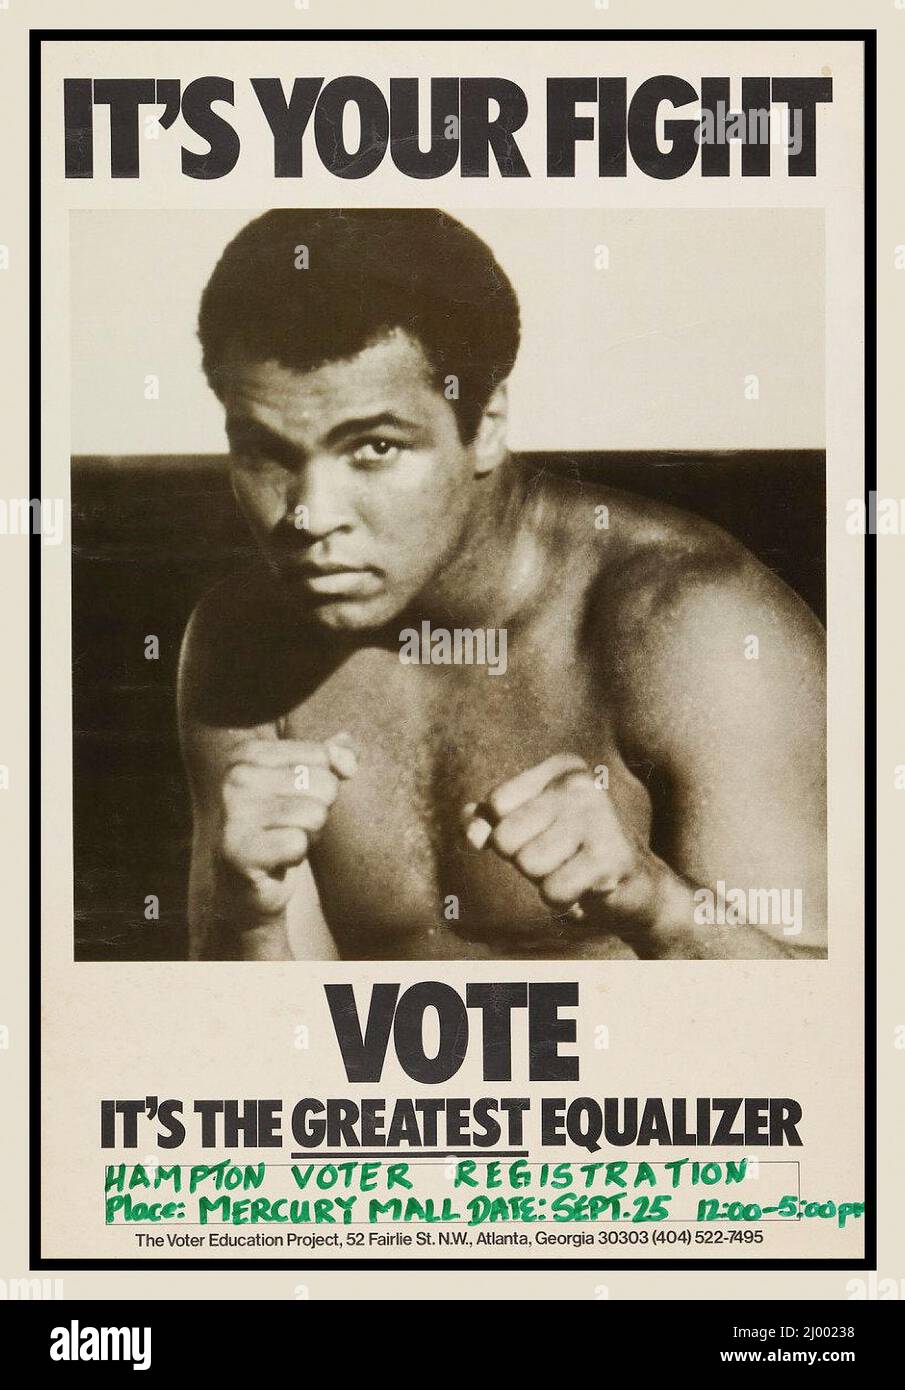 Vintage Equal Rights USA Poster It's Your Fight, Vote! It's the Greatest Equalizer', Voting Rights Poster Featuring Muhammad Ali, United States, (1962) Stock Photo